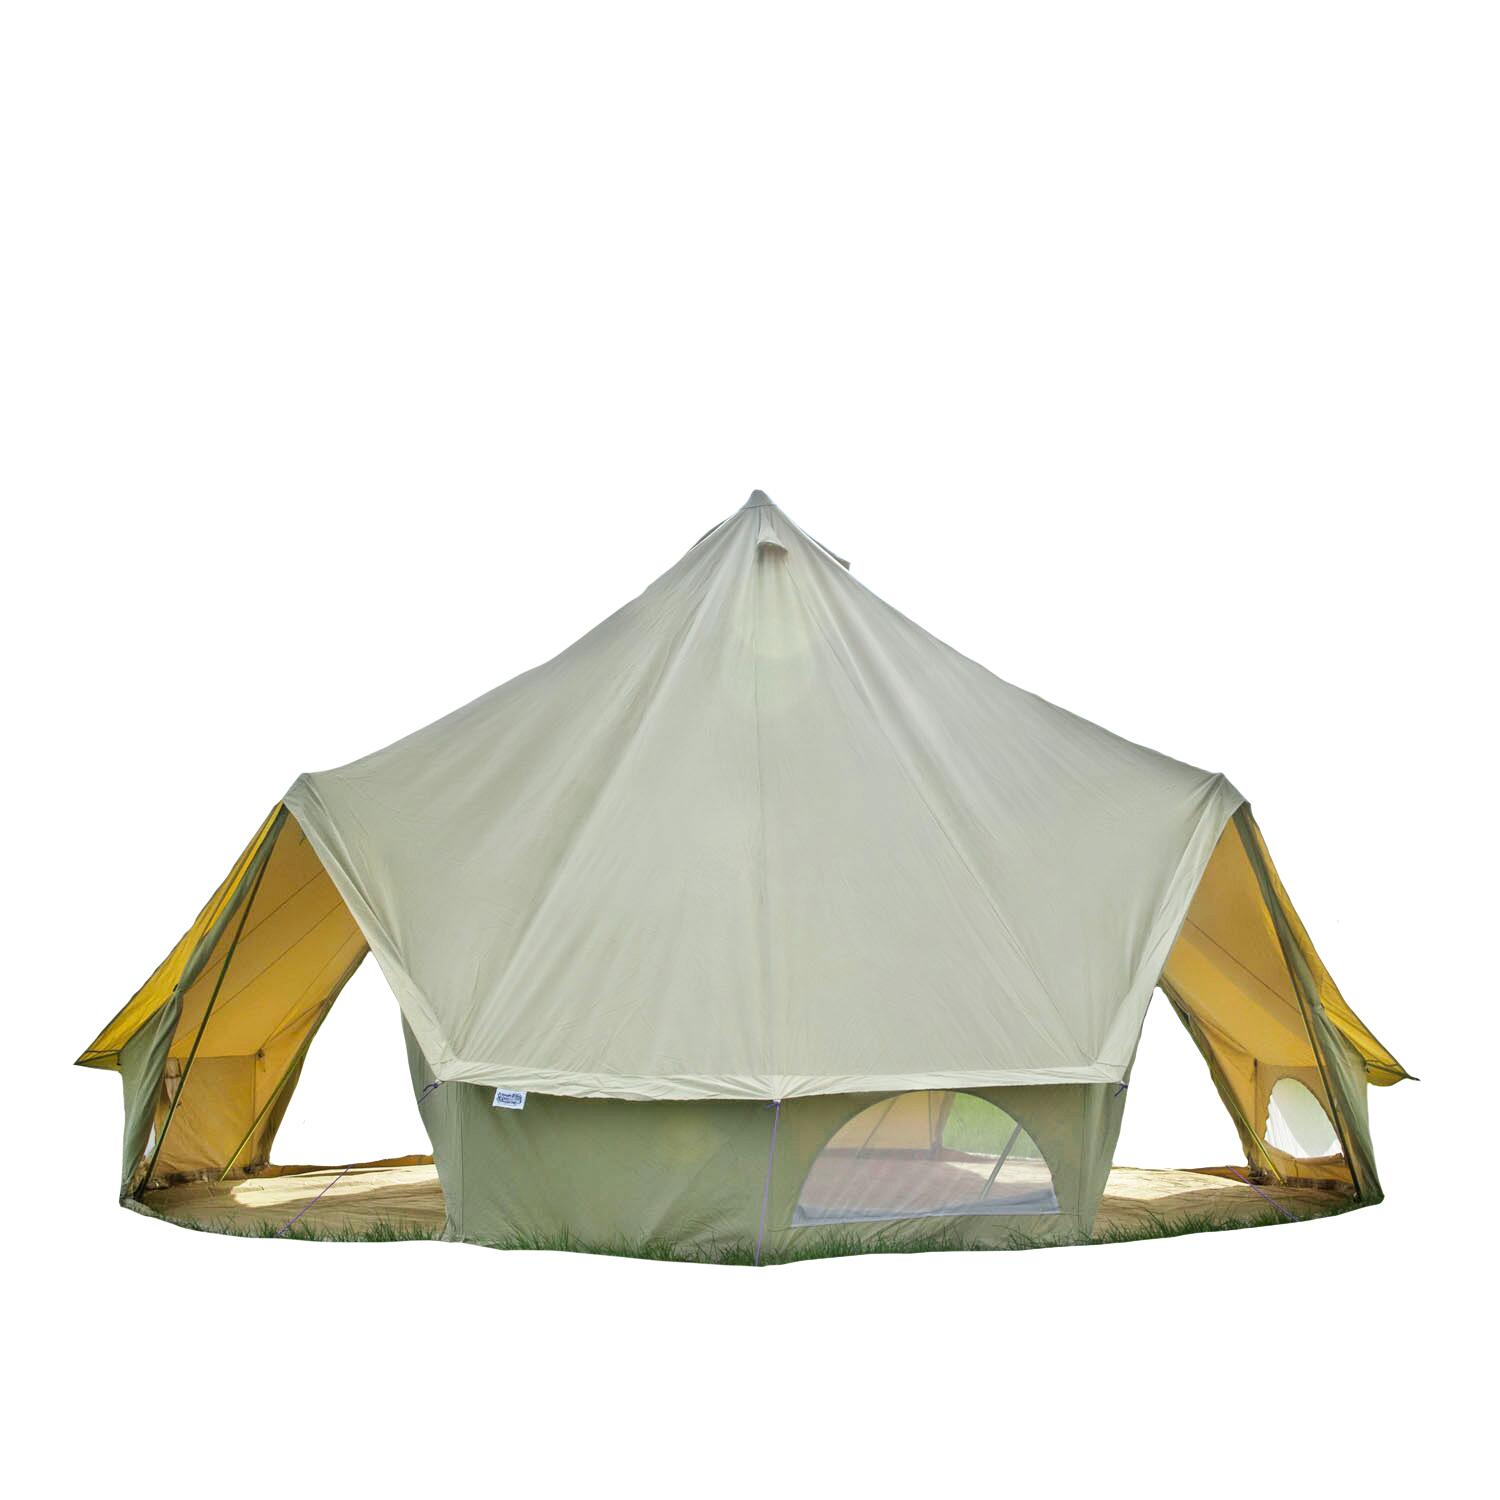 BOUTIQUE CAMPING Classic Bell Tent - Double Door